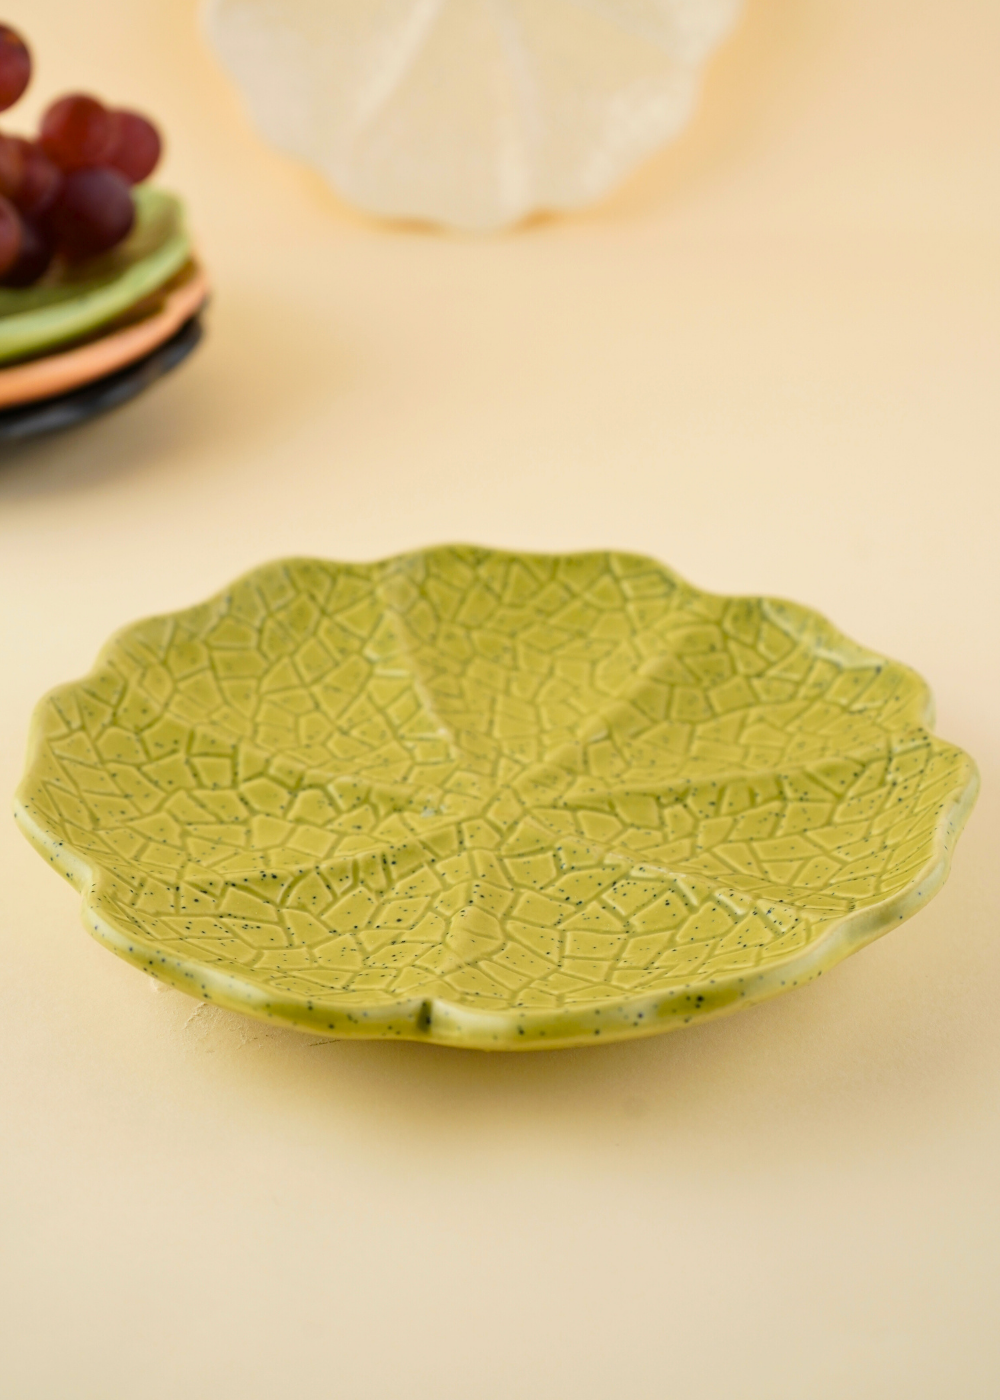 green cabbage snack plate with cabbage leaf design